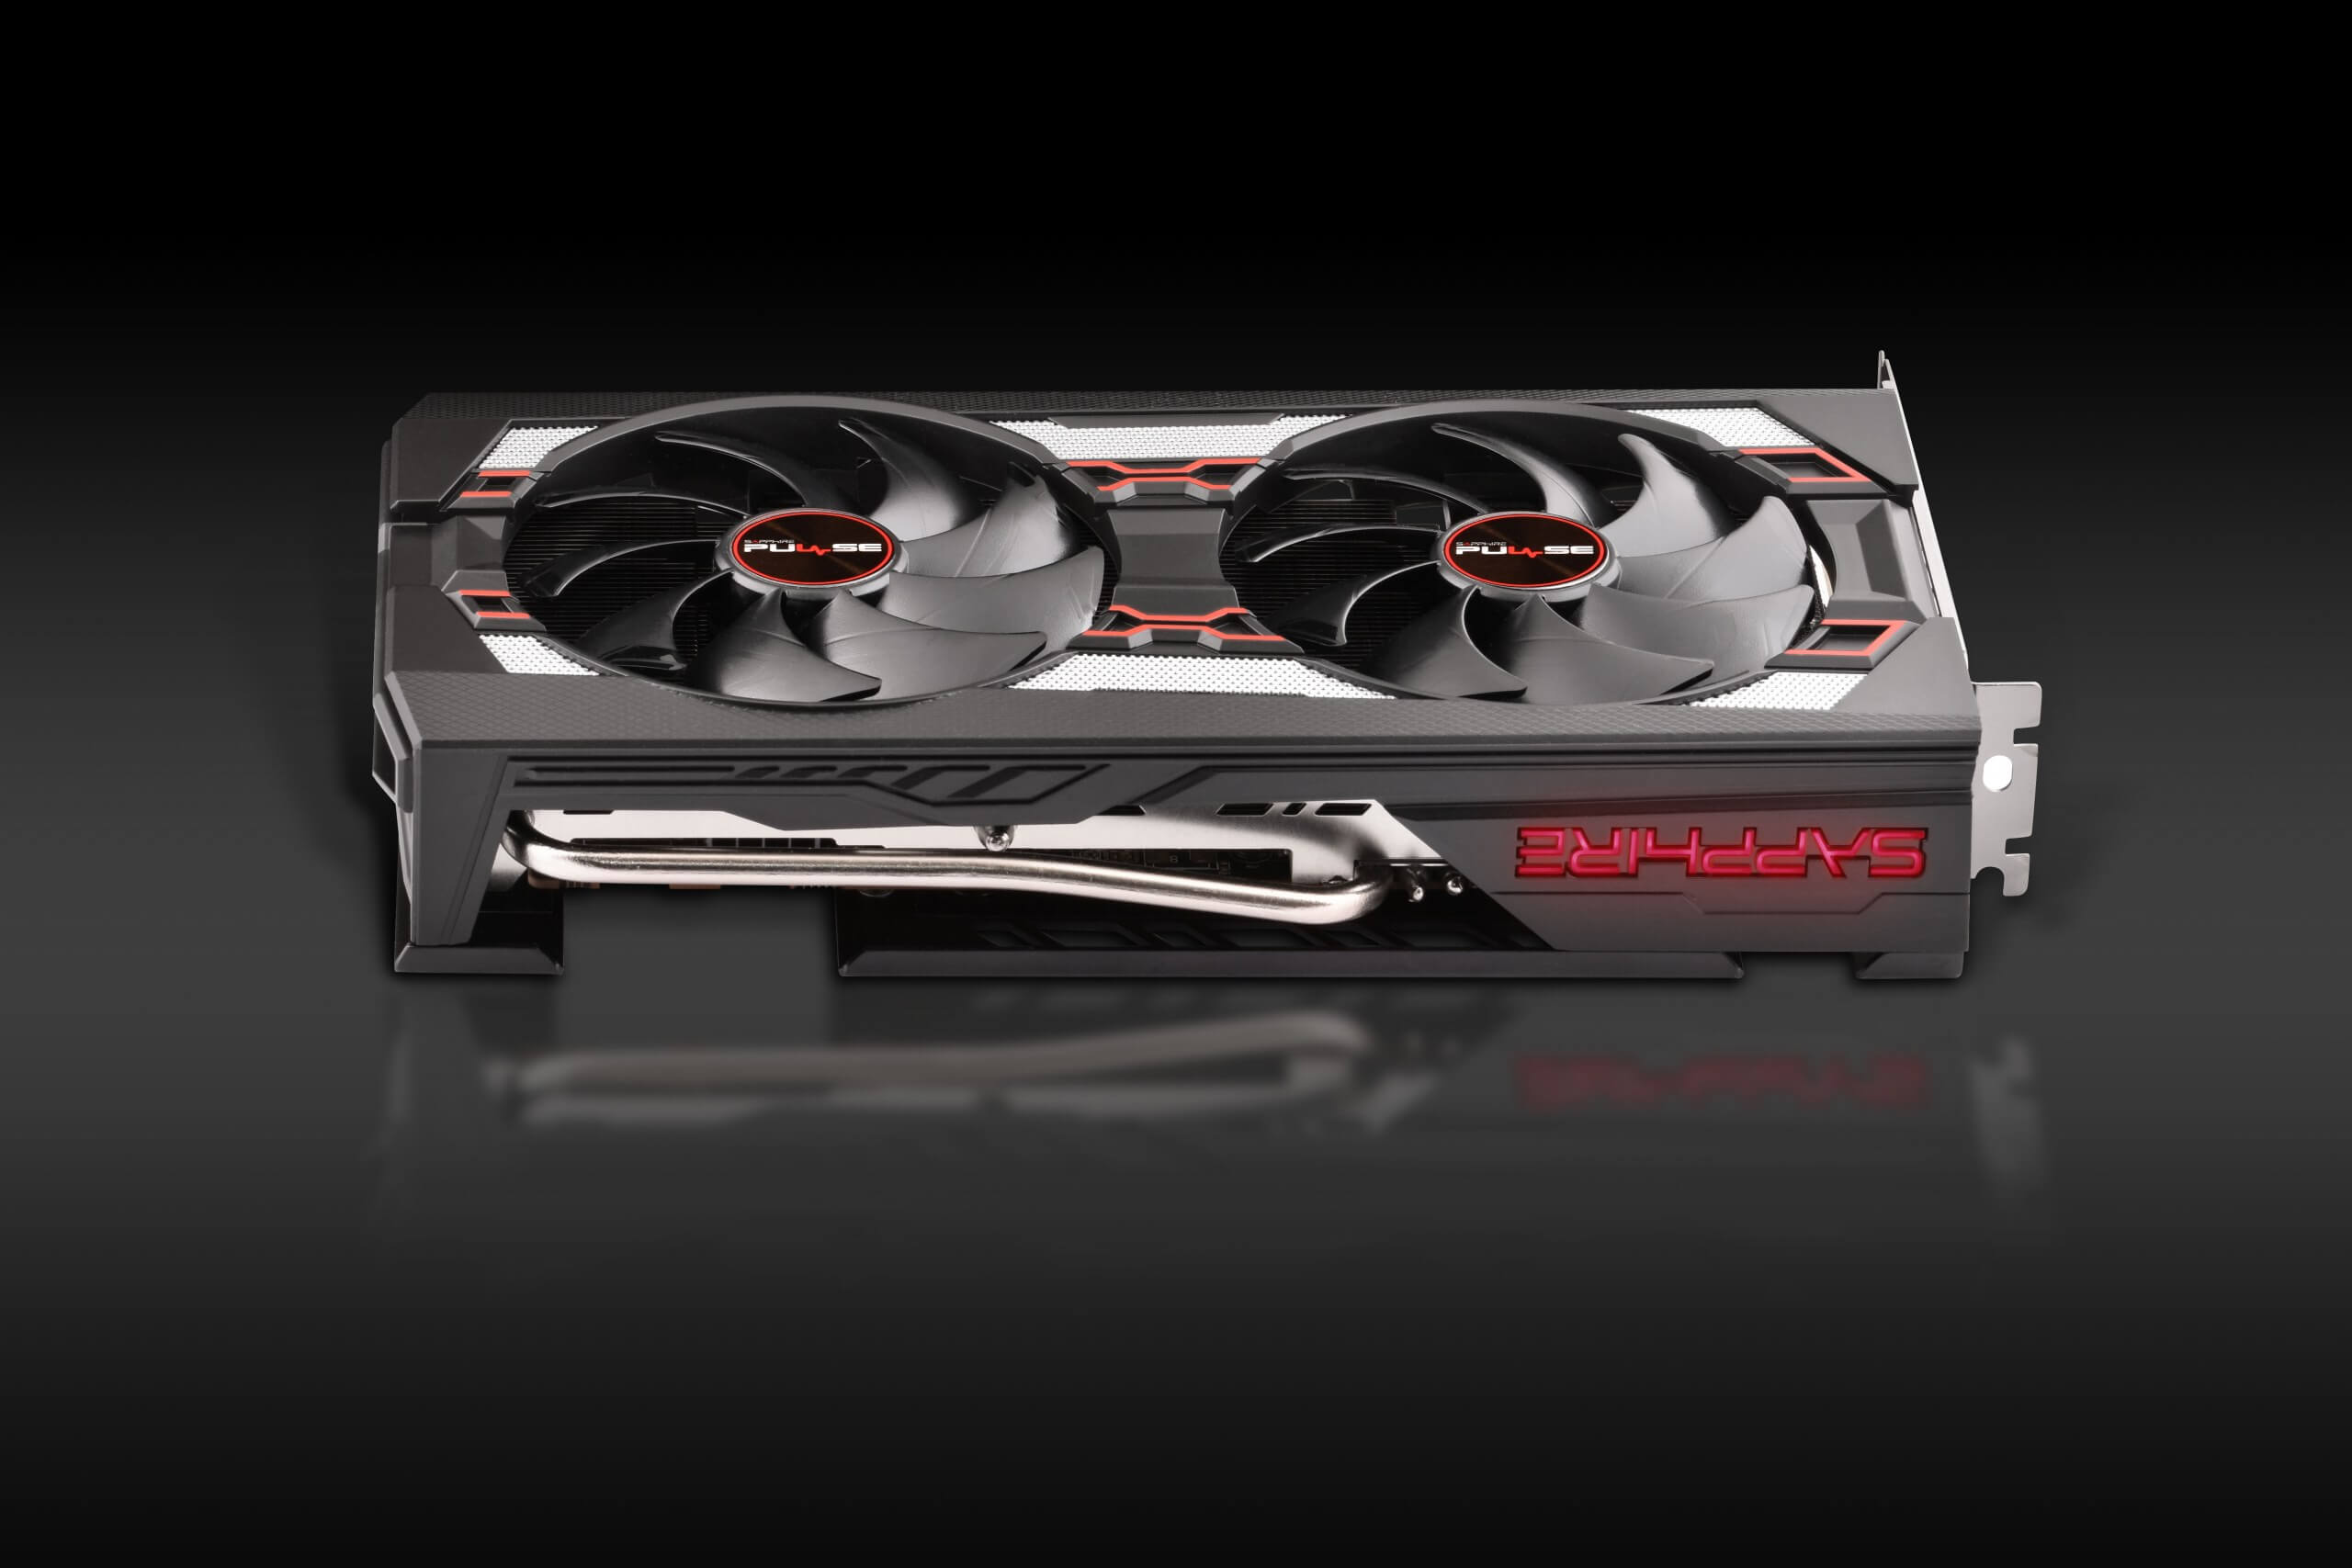 Radeon RX 5600 XT with new vBIOS boost shows impressive new benchmark scores